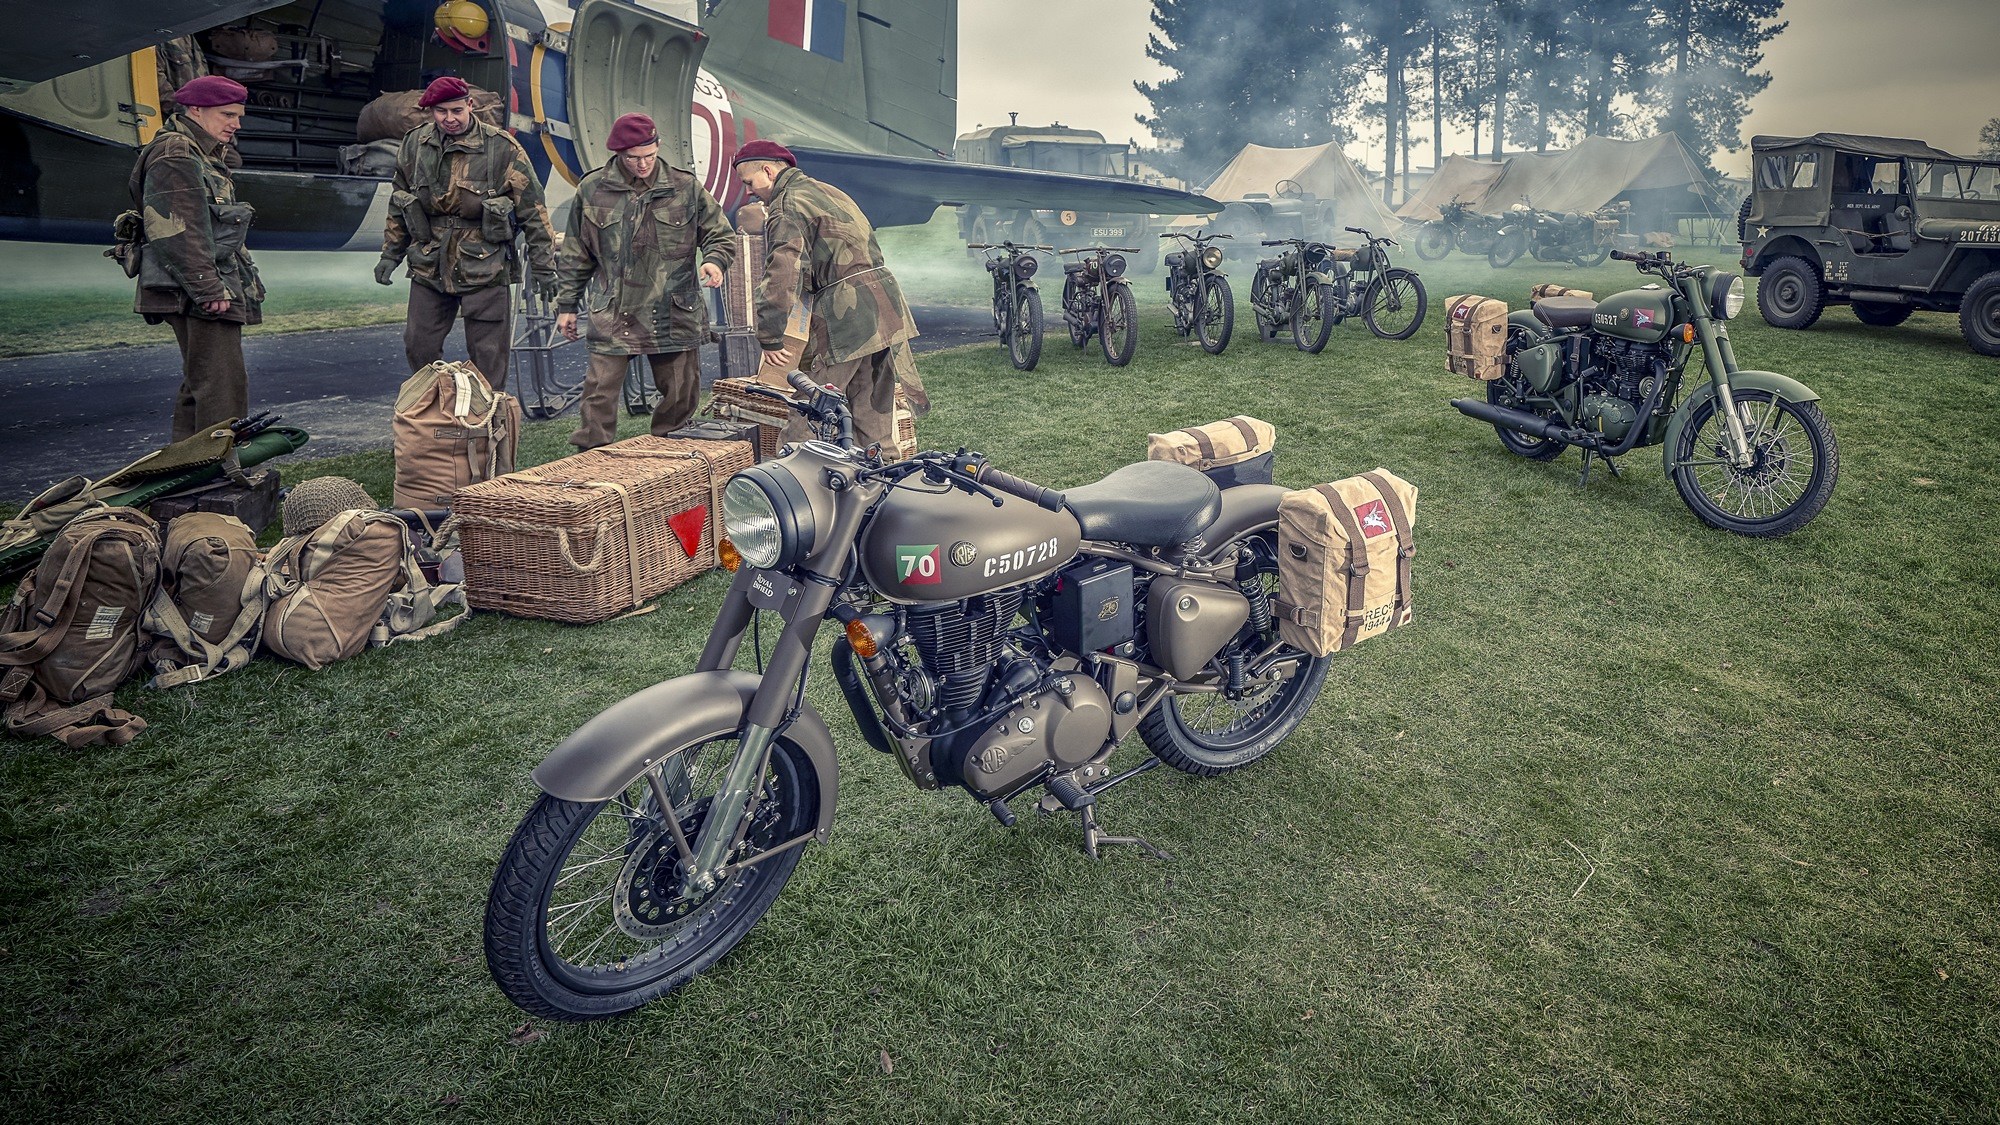 royal enfield classic 500 hd wallpapers,motor vehicle,motorcycle,vehicle,mode of transport,military